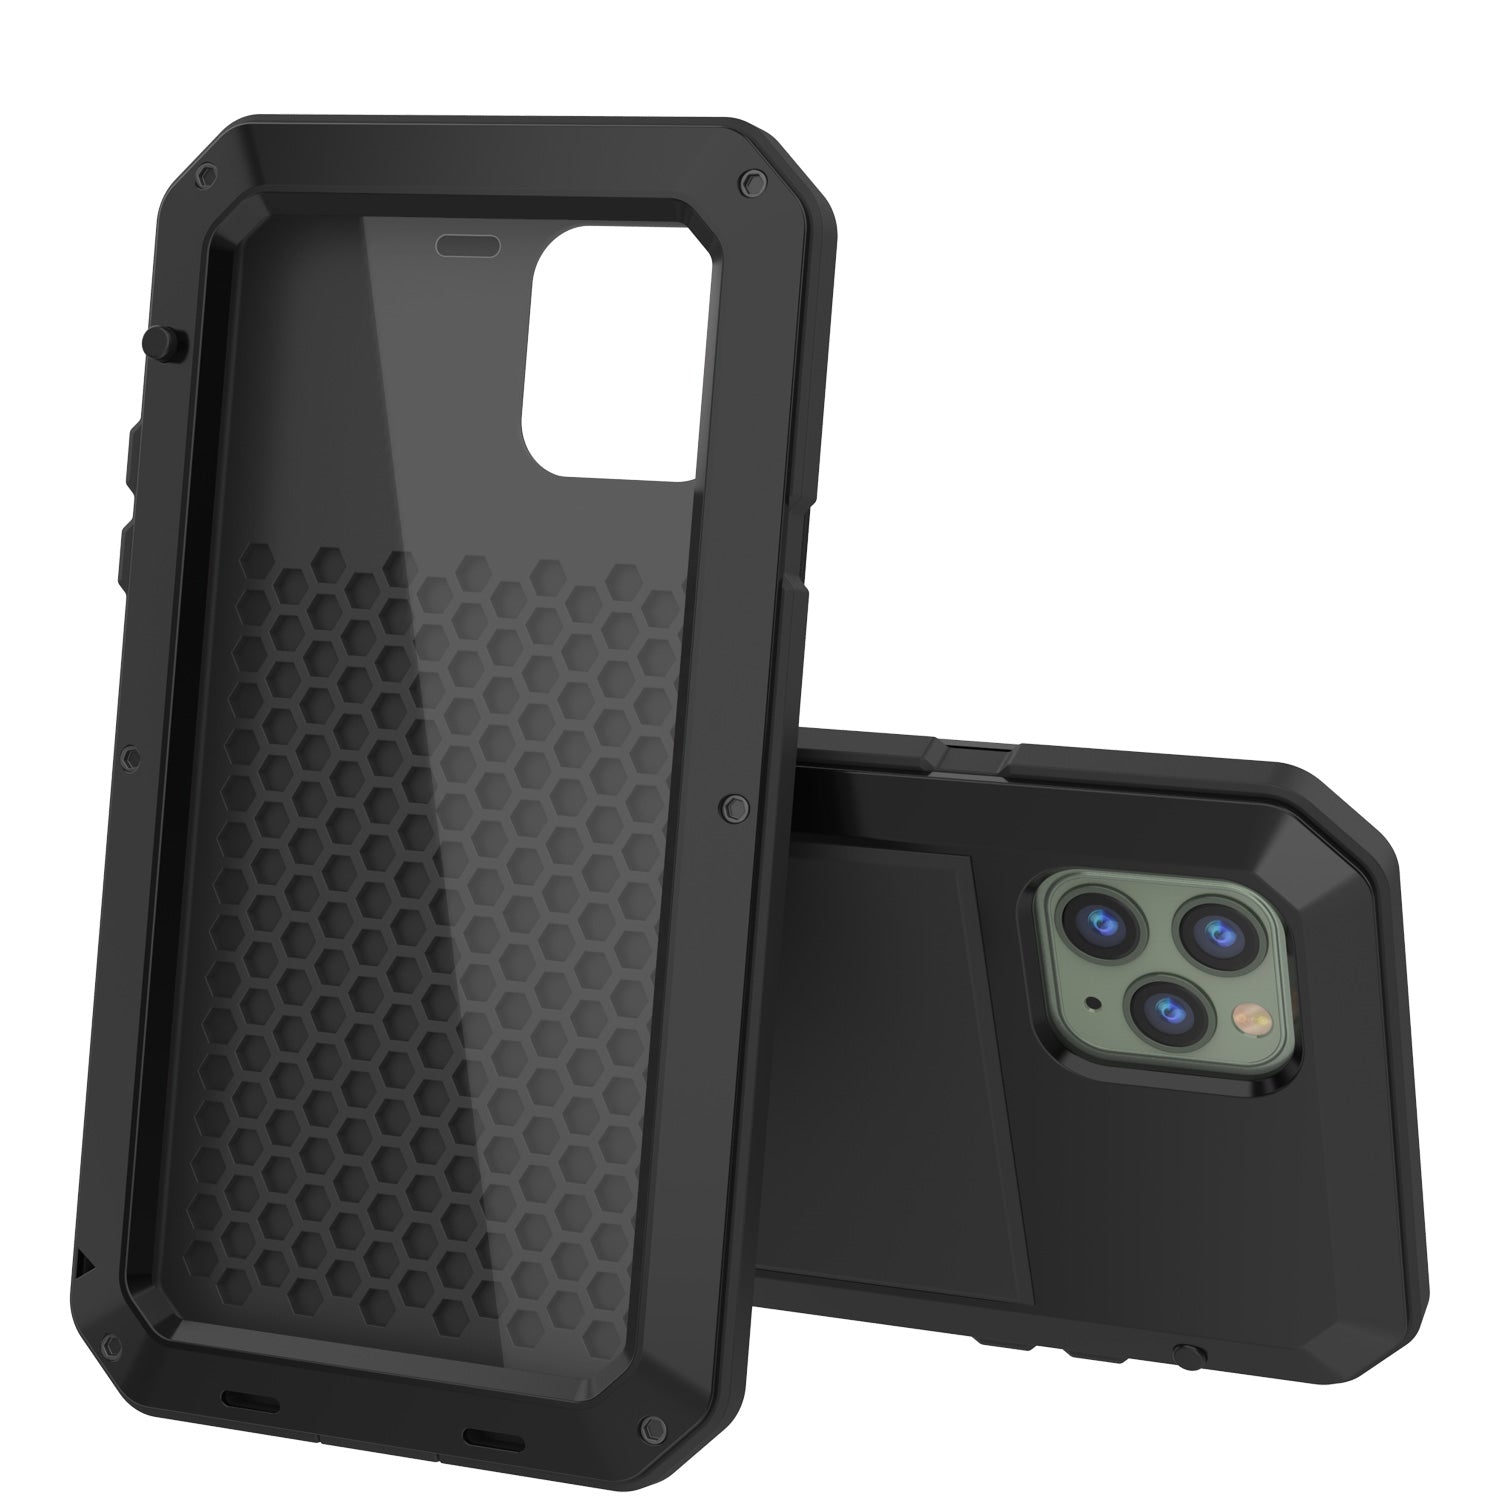 Case for iPhone 11 for the whole body with a built-in protective